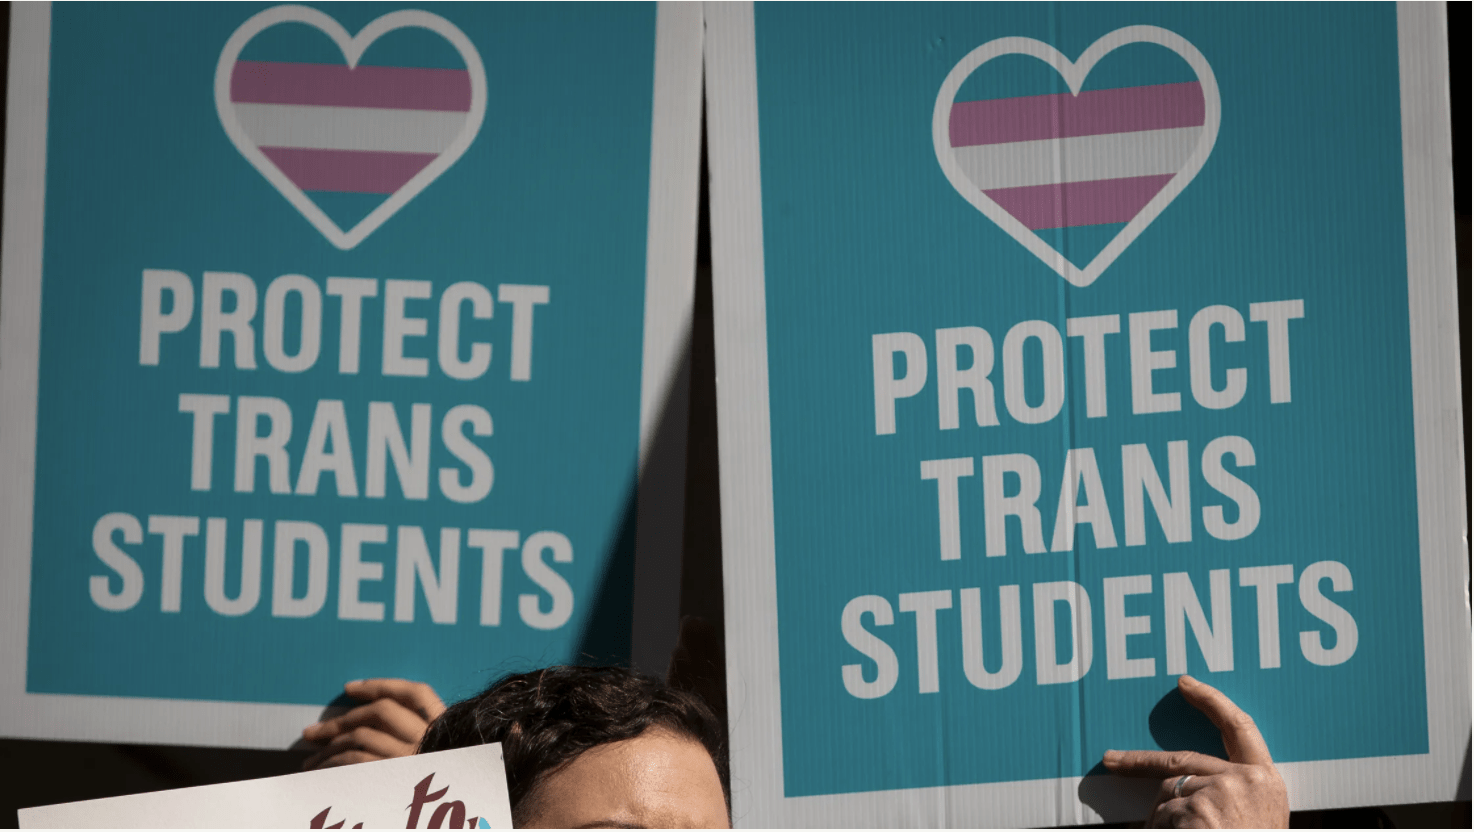 Image of people holding Protect Trans Students signs at a rally